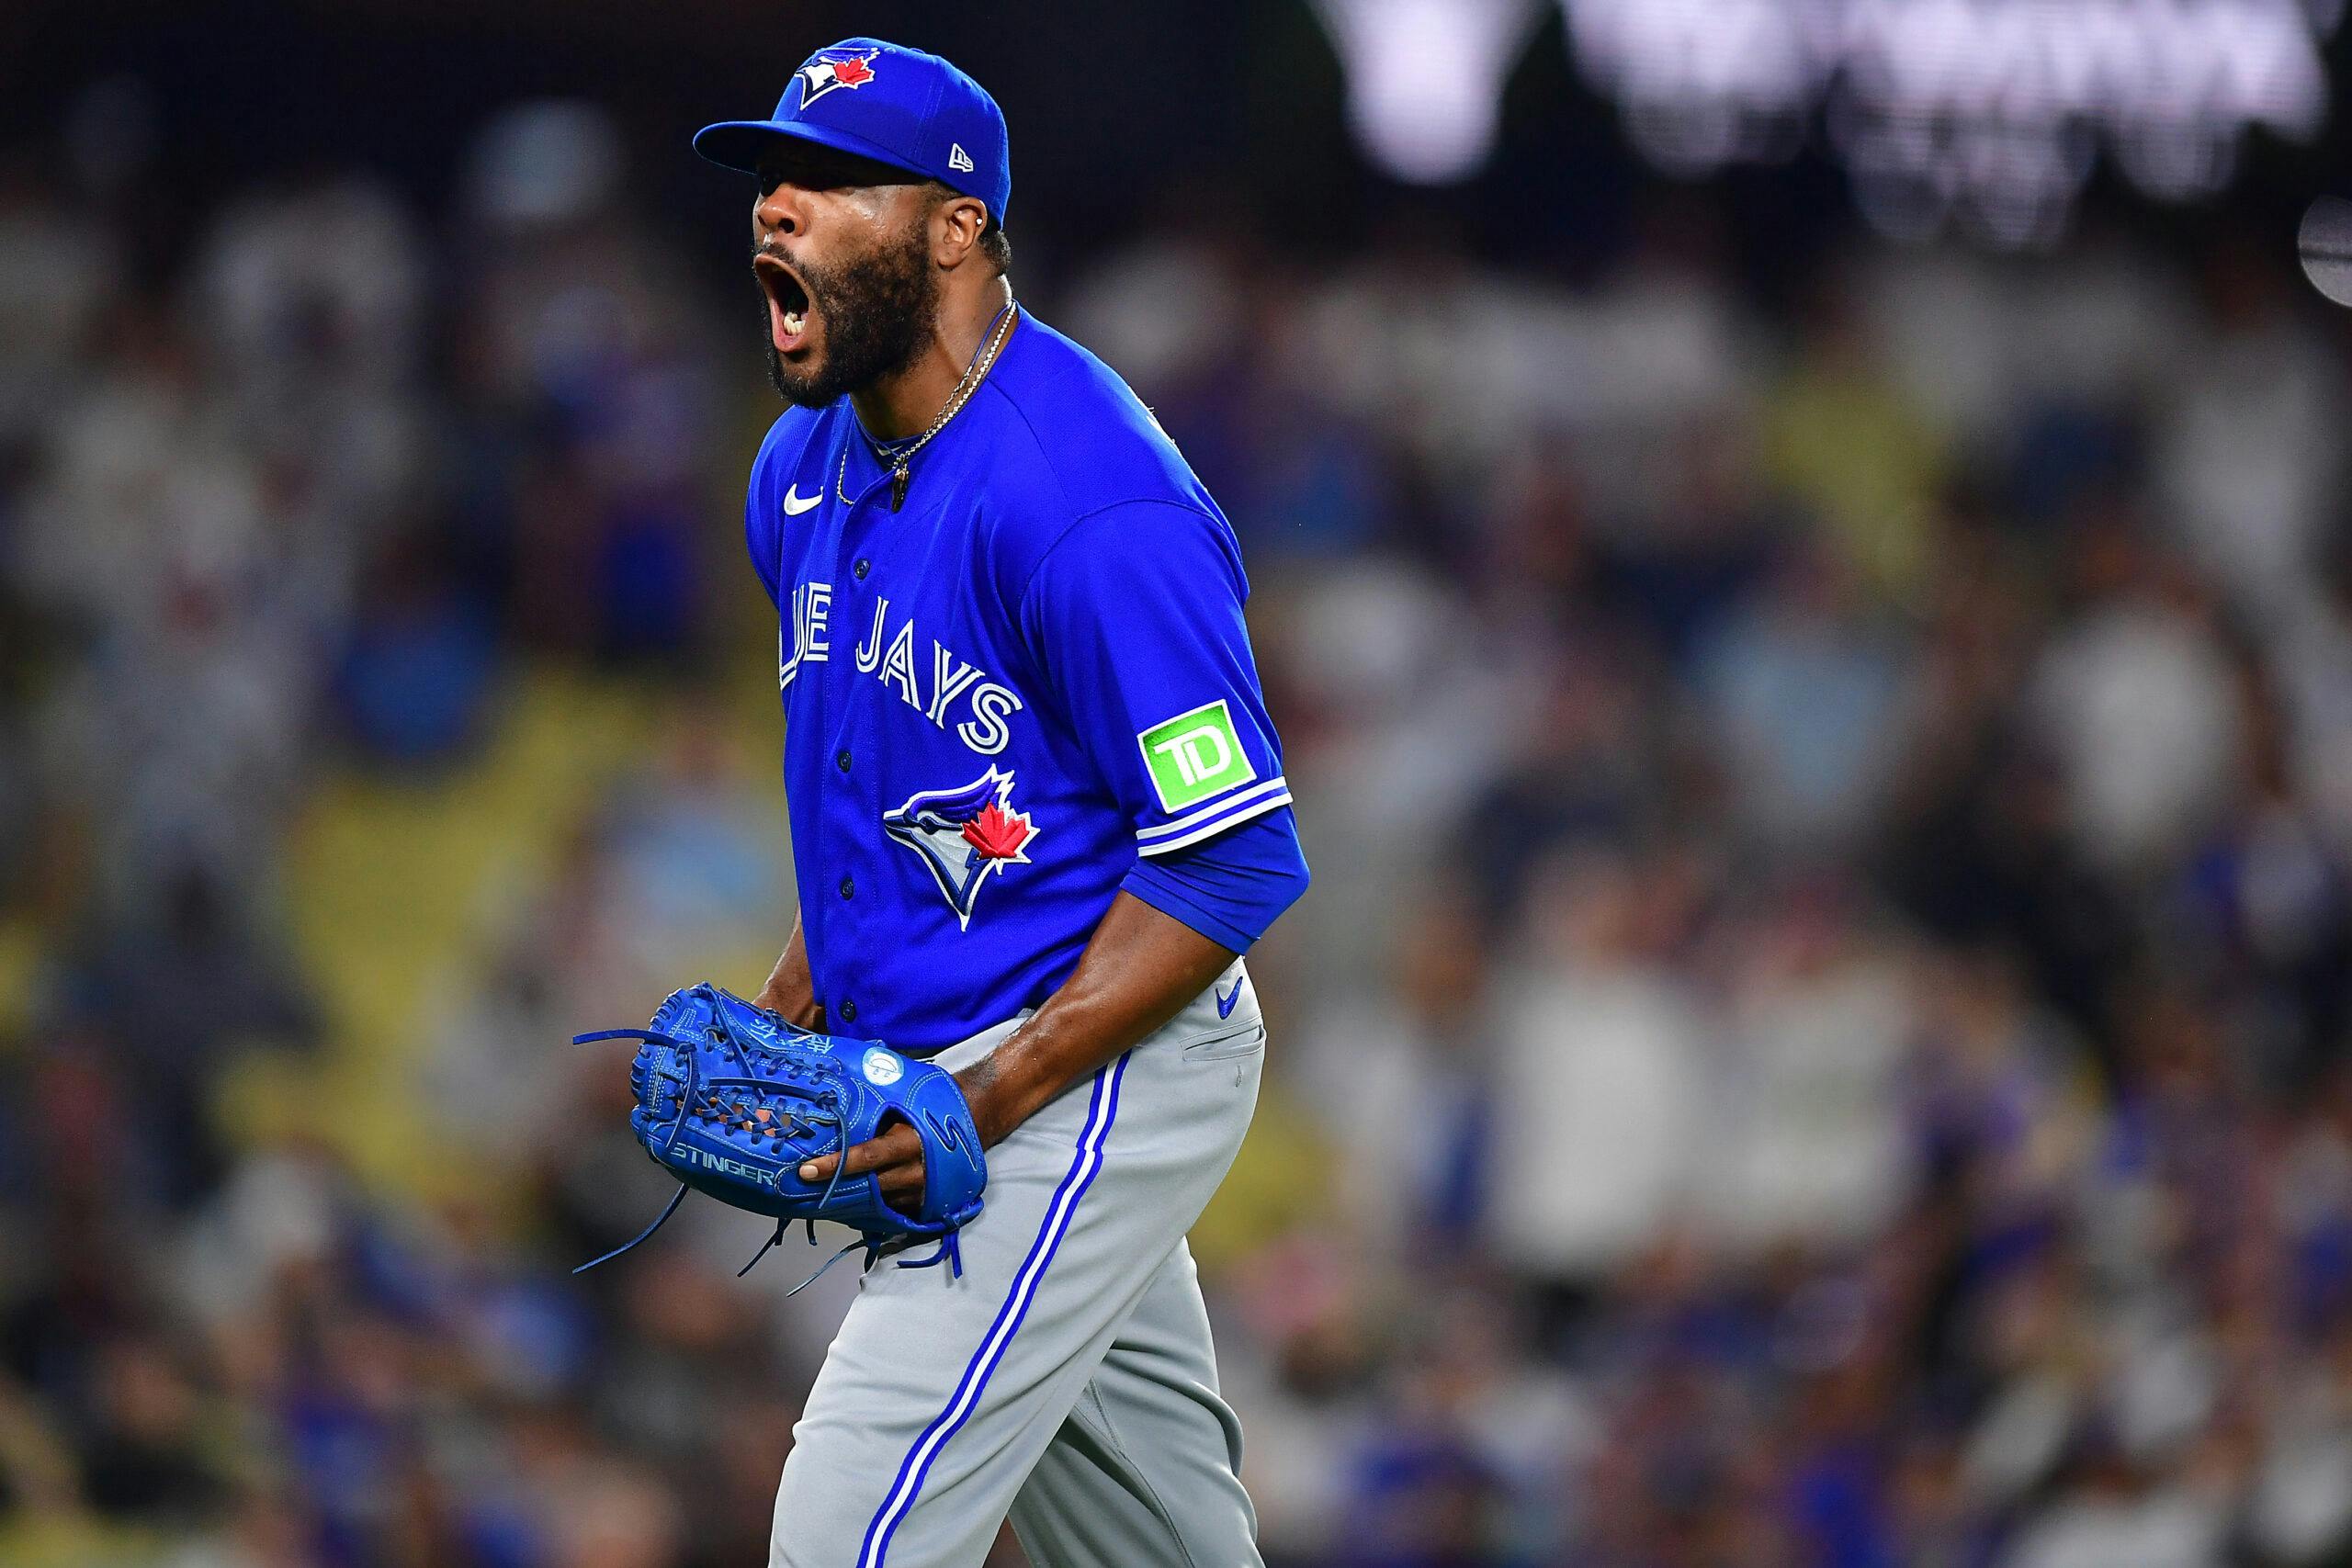 Blue Jays agree to new deals for 11 players, including Chapman